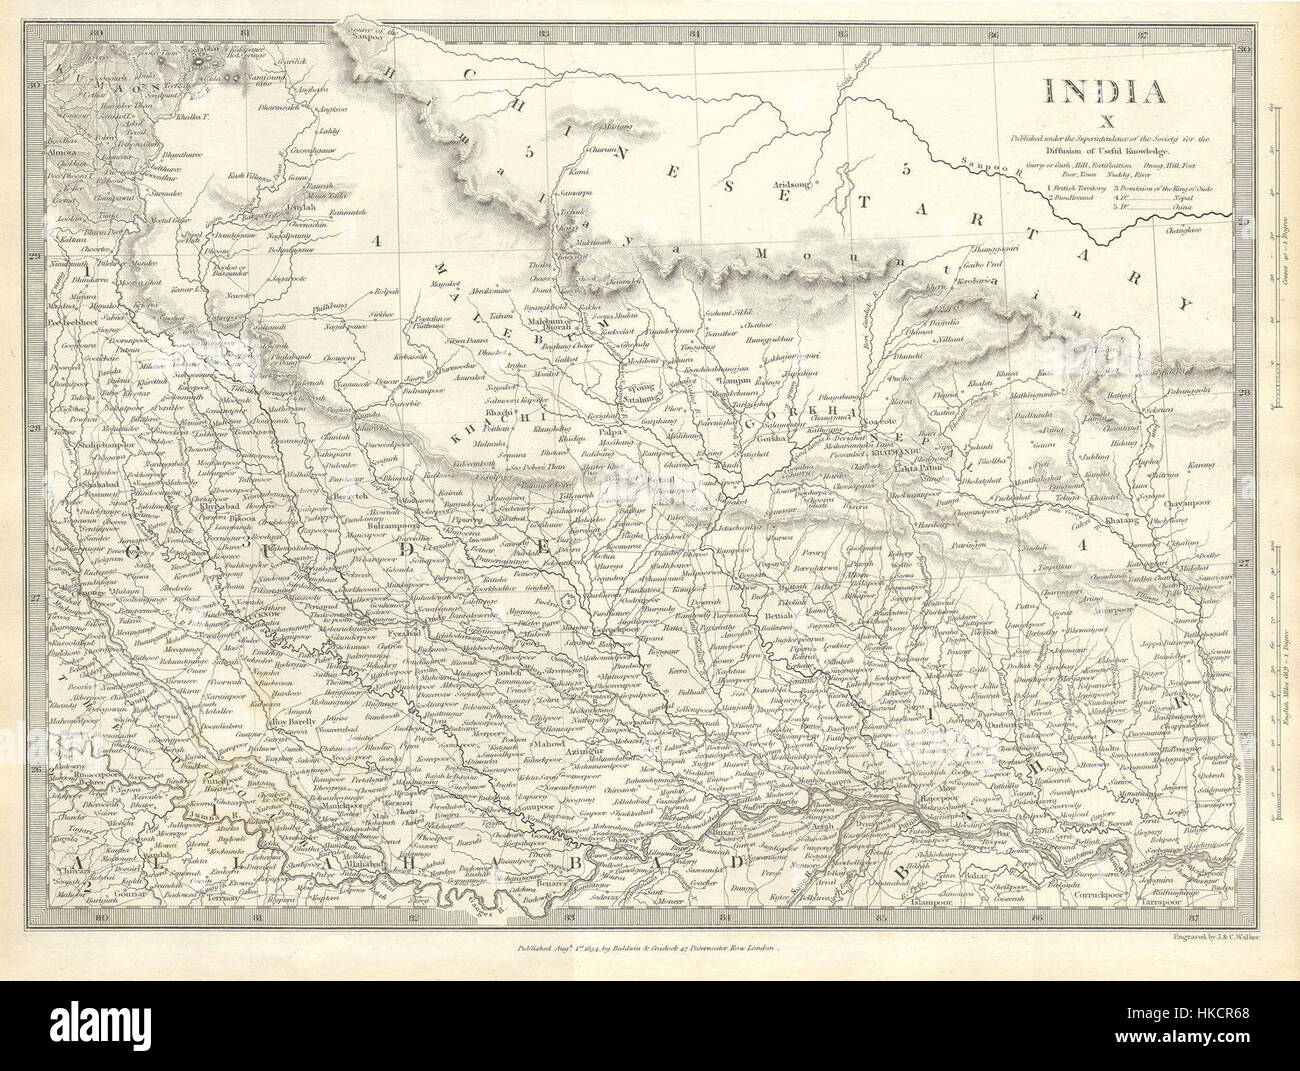 1834 S.D.U.K. Map of North India, Nepal, and Allahabad   Geographicus   IndiaX sduk 1834 Stock Photo